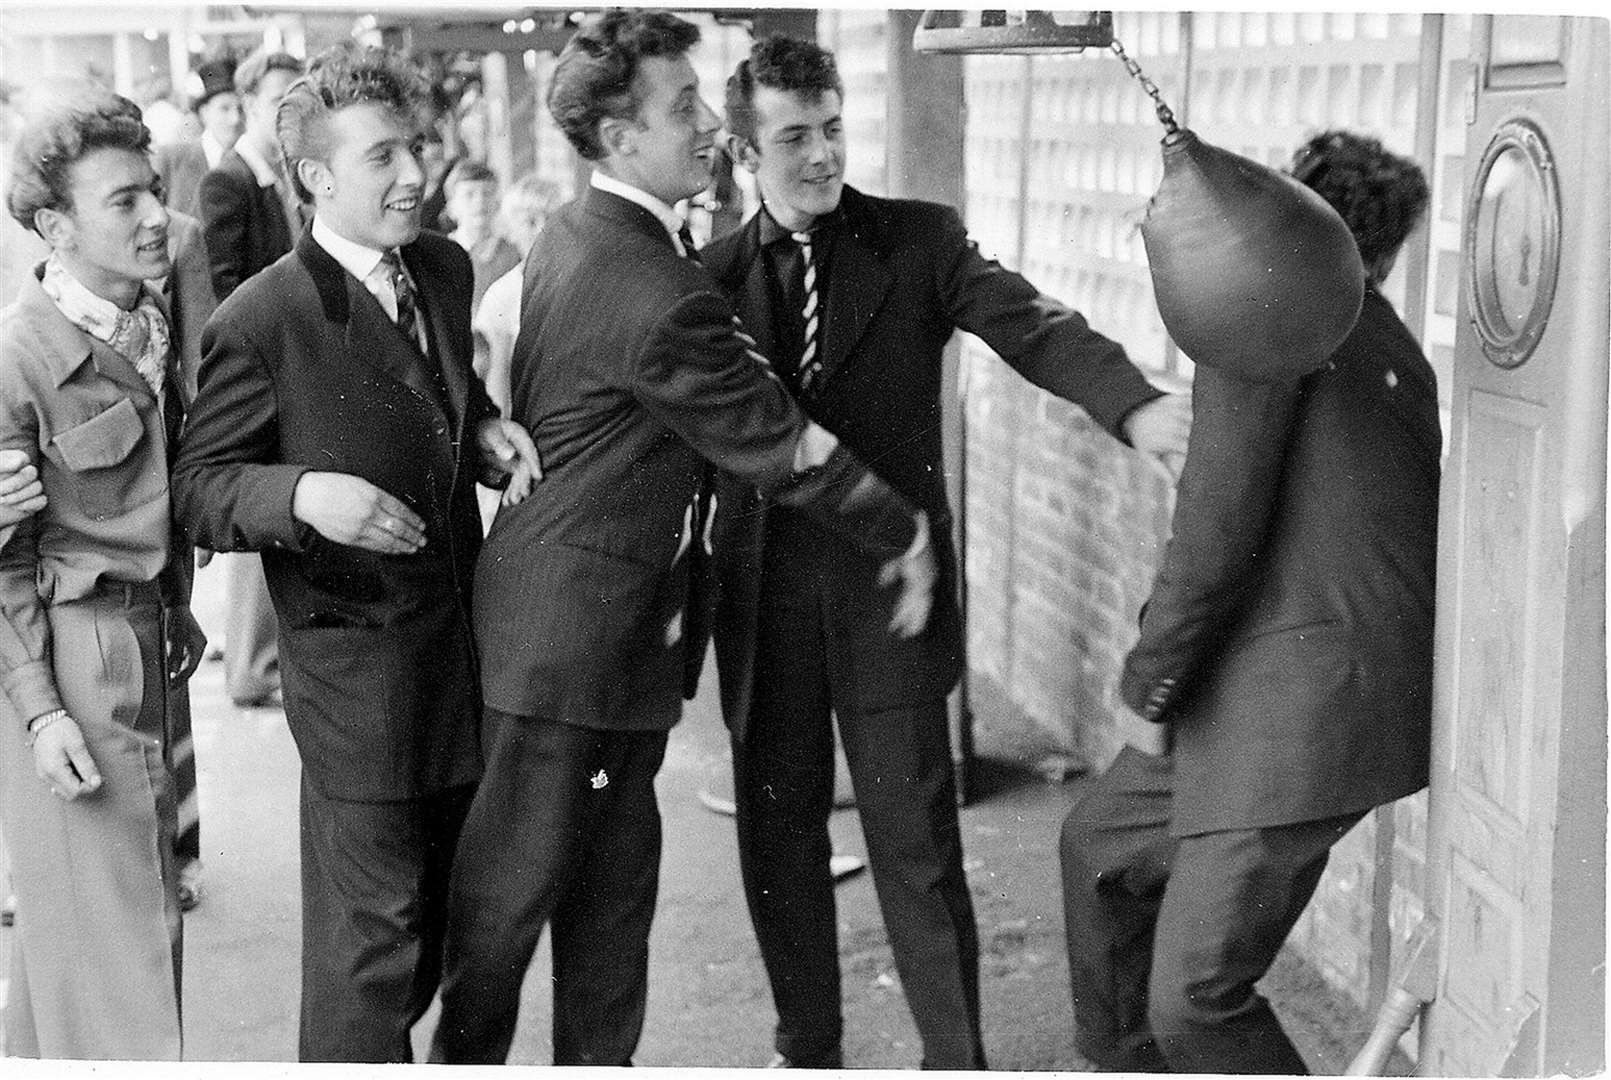 Teddy Boys in 1954 at Dreamland. Picture: Loaned by Nick Evans and Dreamland Trust